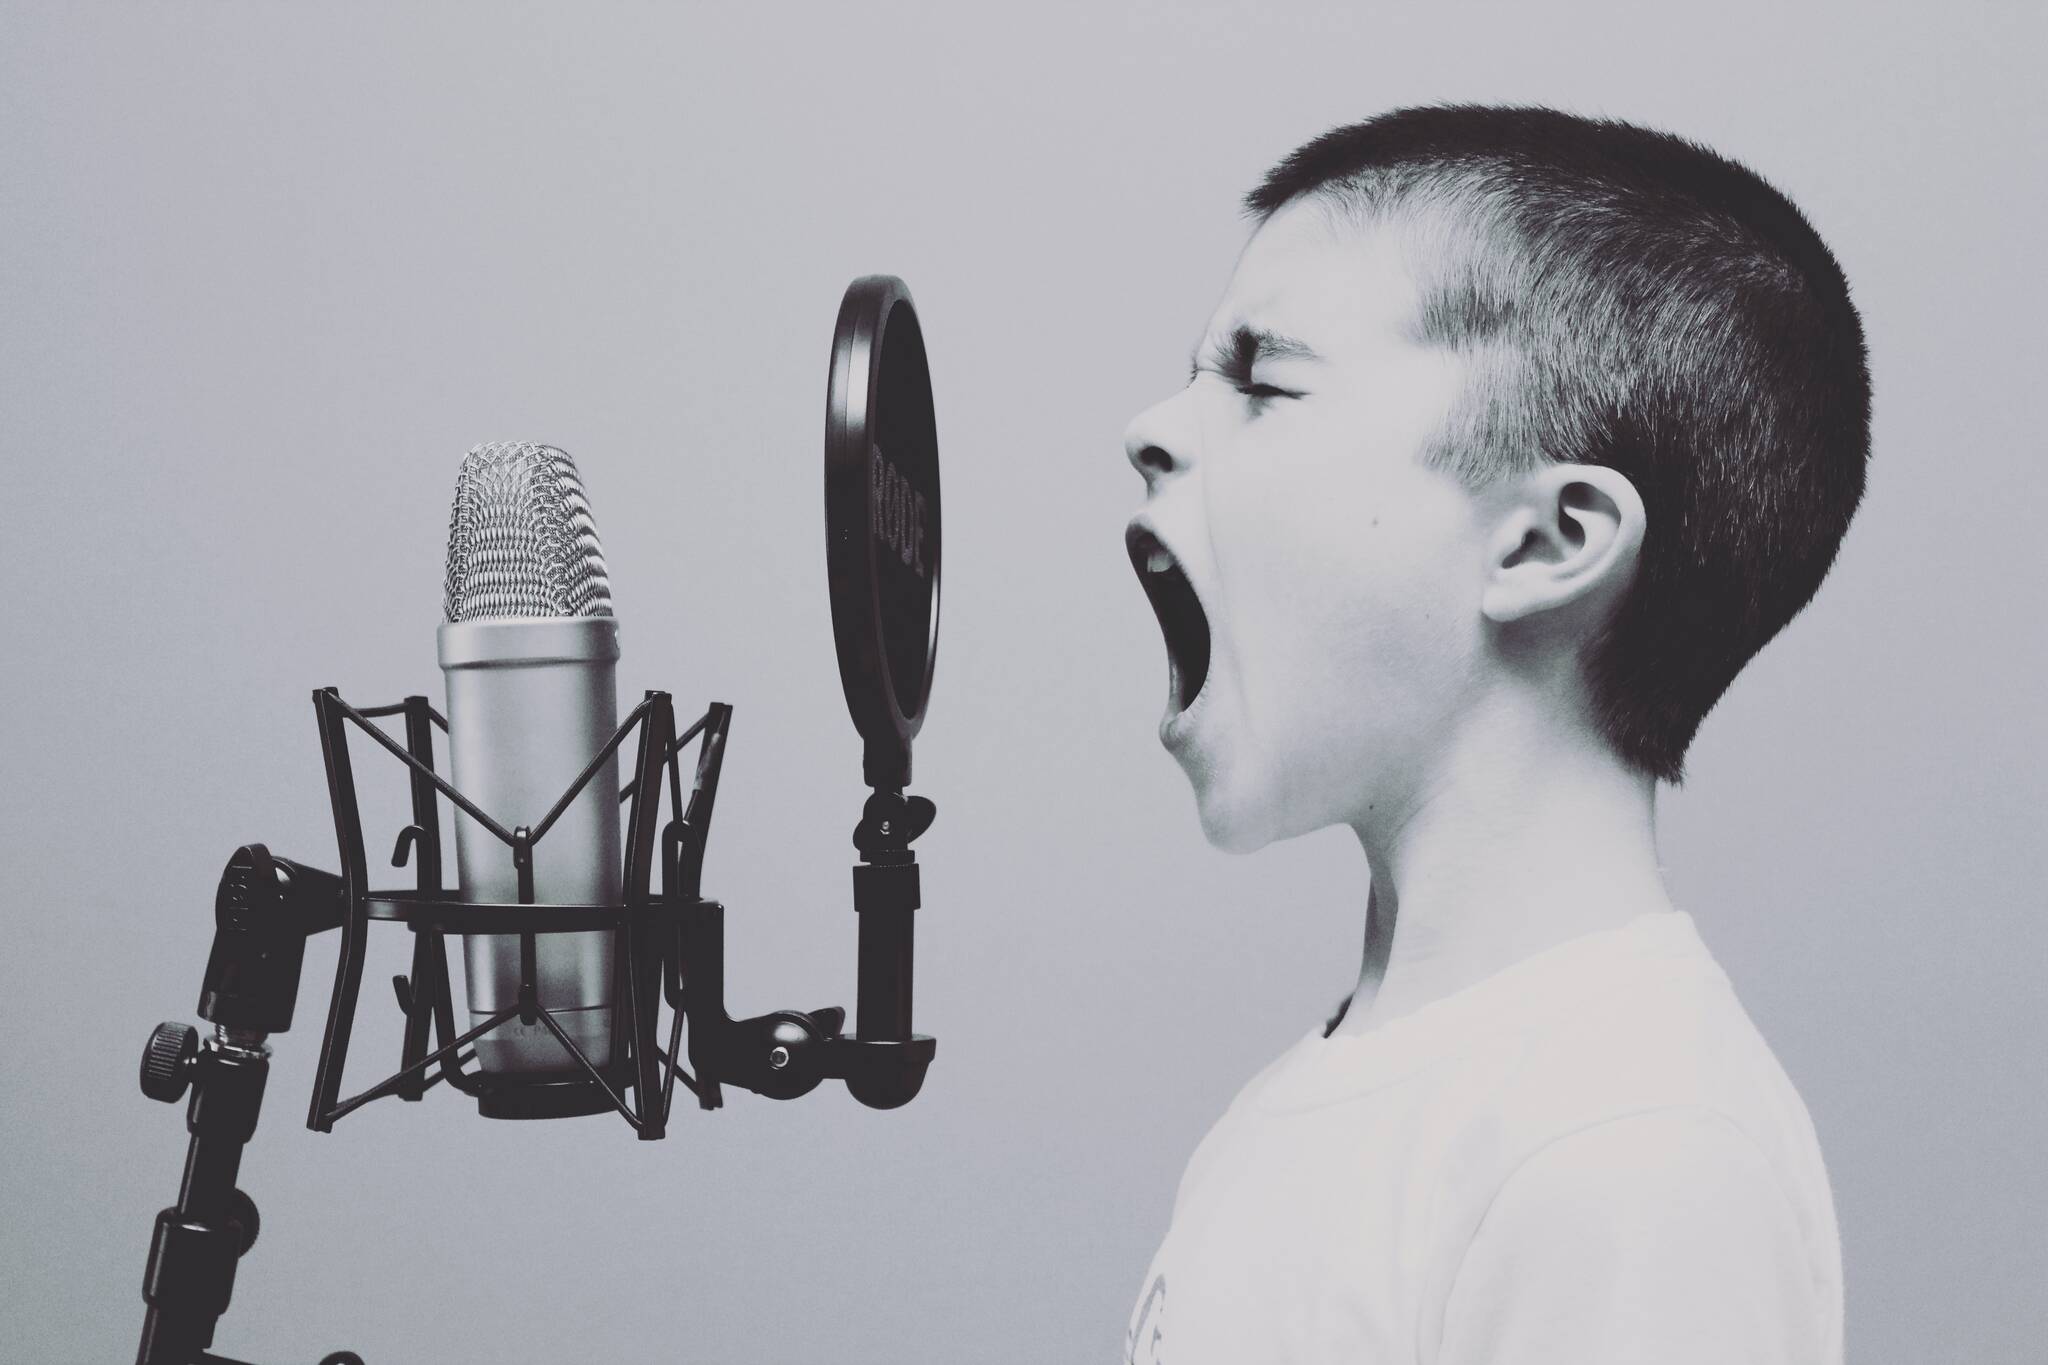 Monochrome photograph of a kid viewed from the side screaming through a pop shield into a condenser microphone